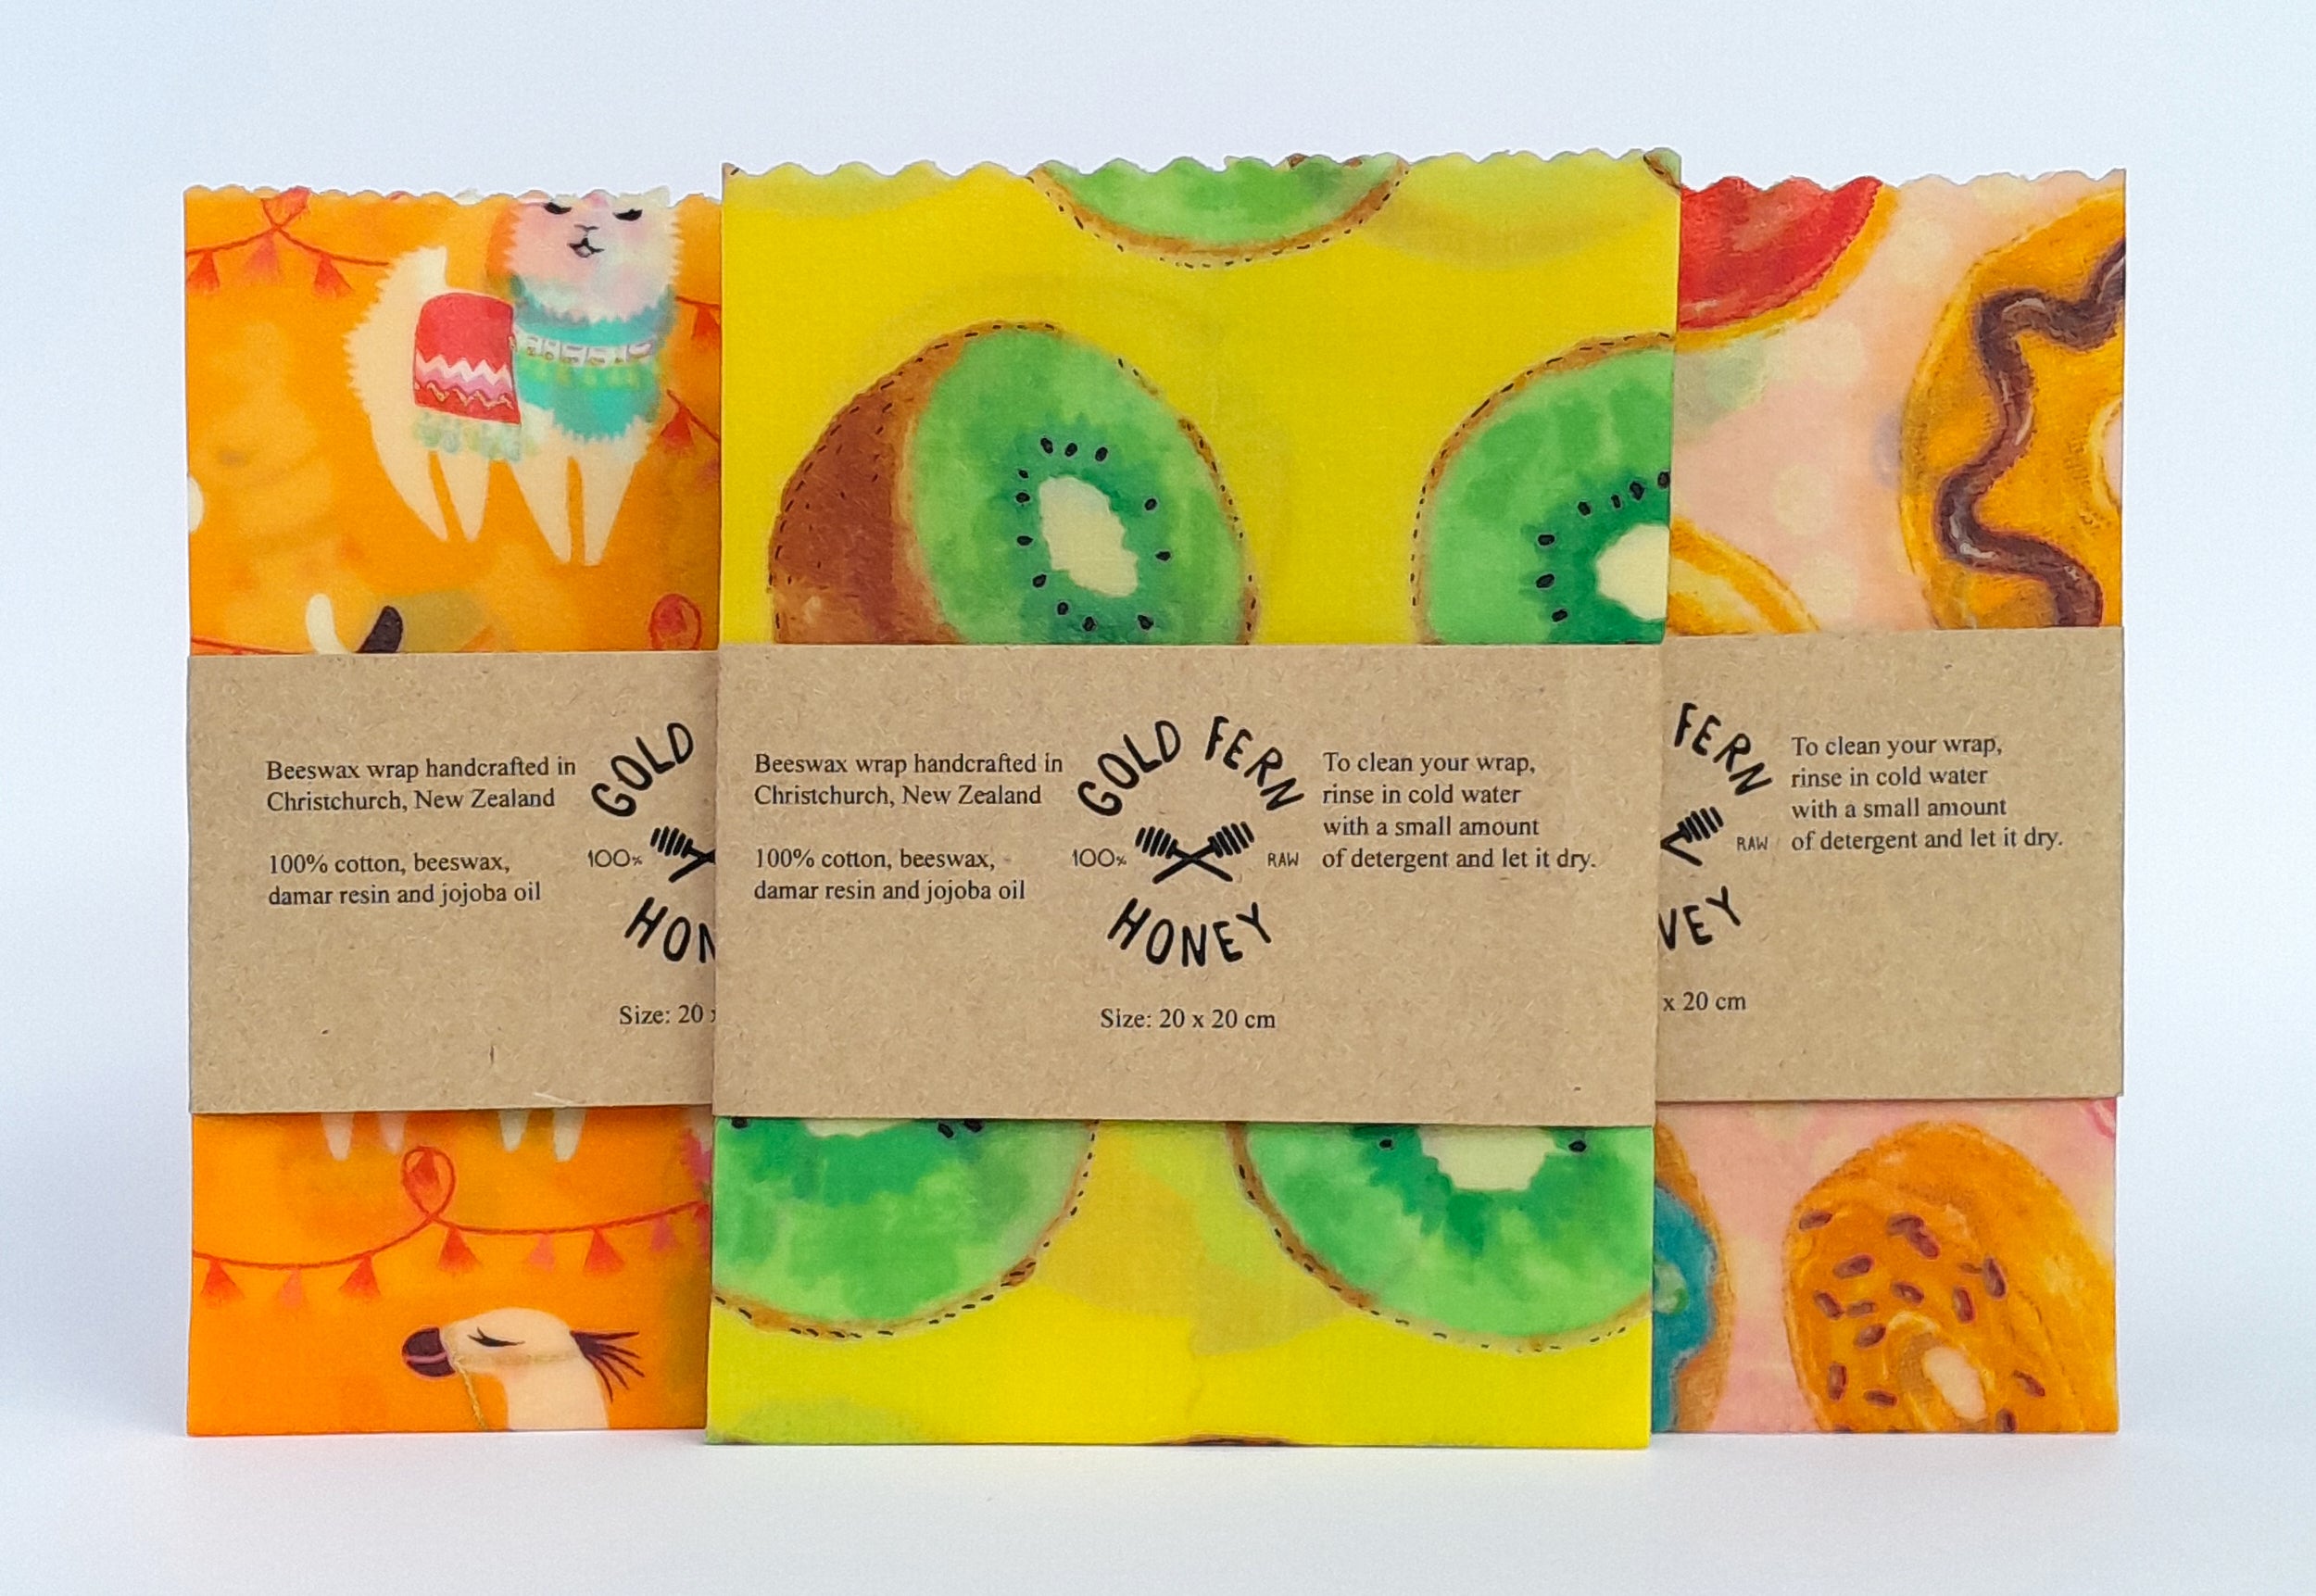 Beeswax and Beeswax Wraps